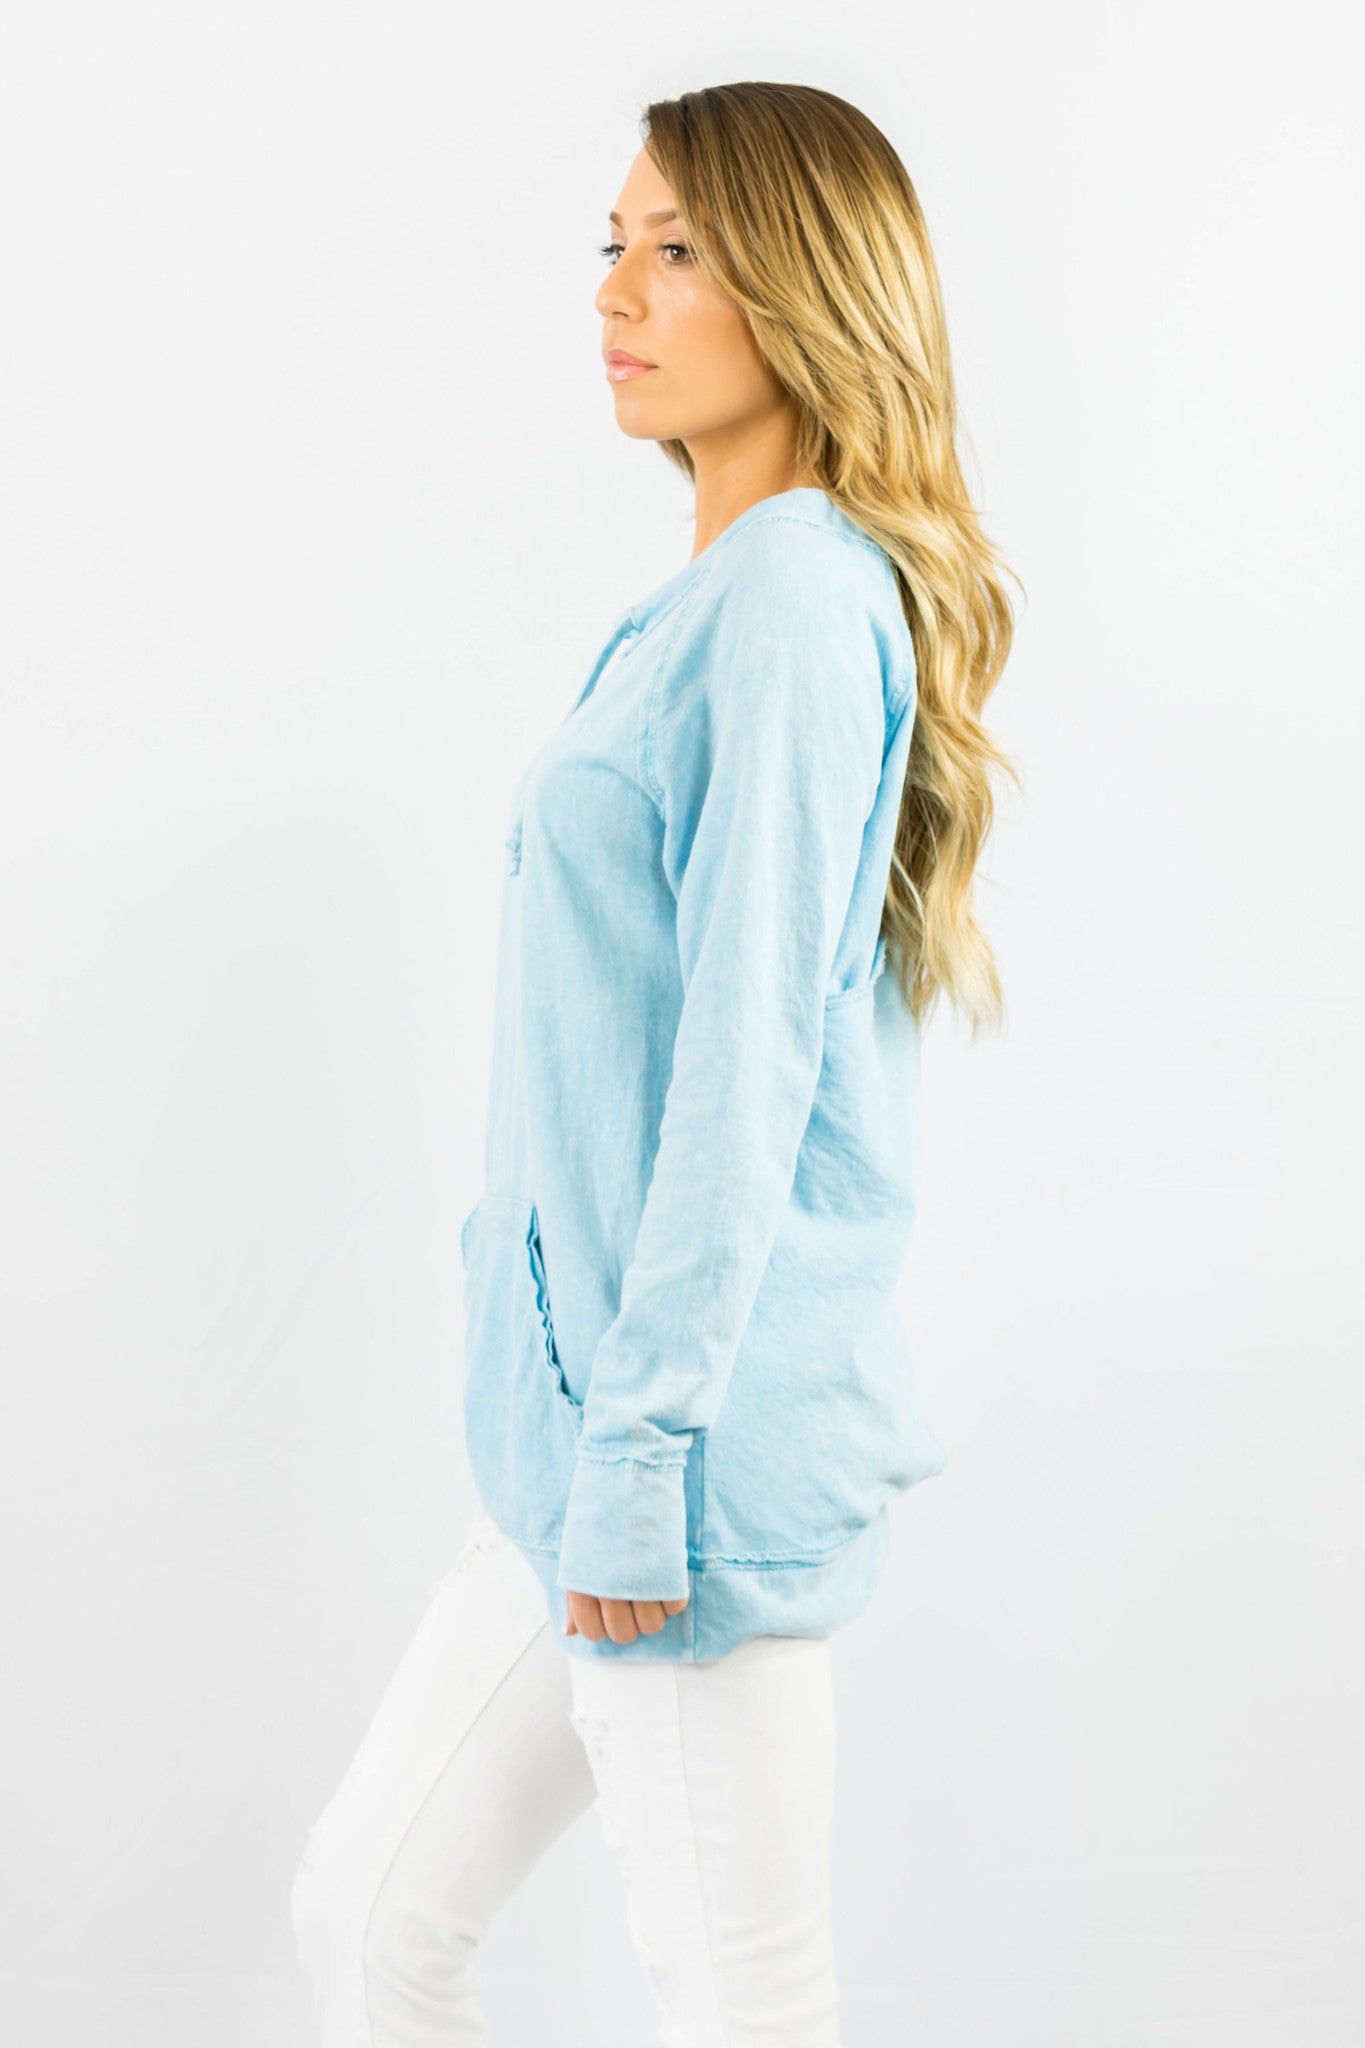 Baby Blue V Back Sweater- OUTERWEAR-ZIP CODE-Free Vibrationz